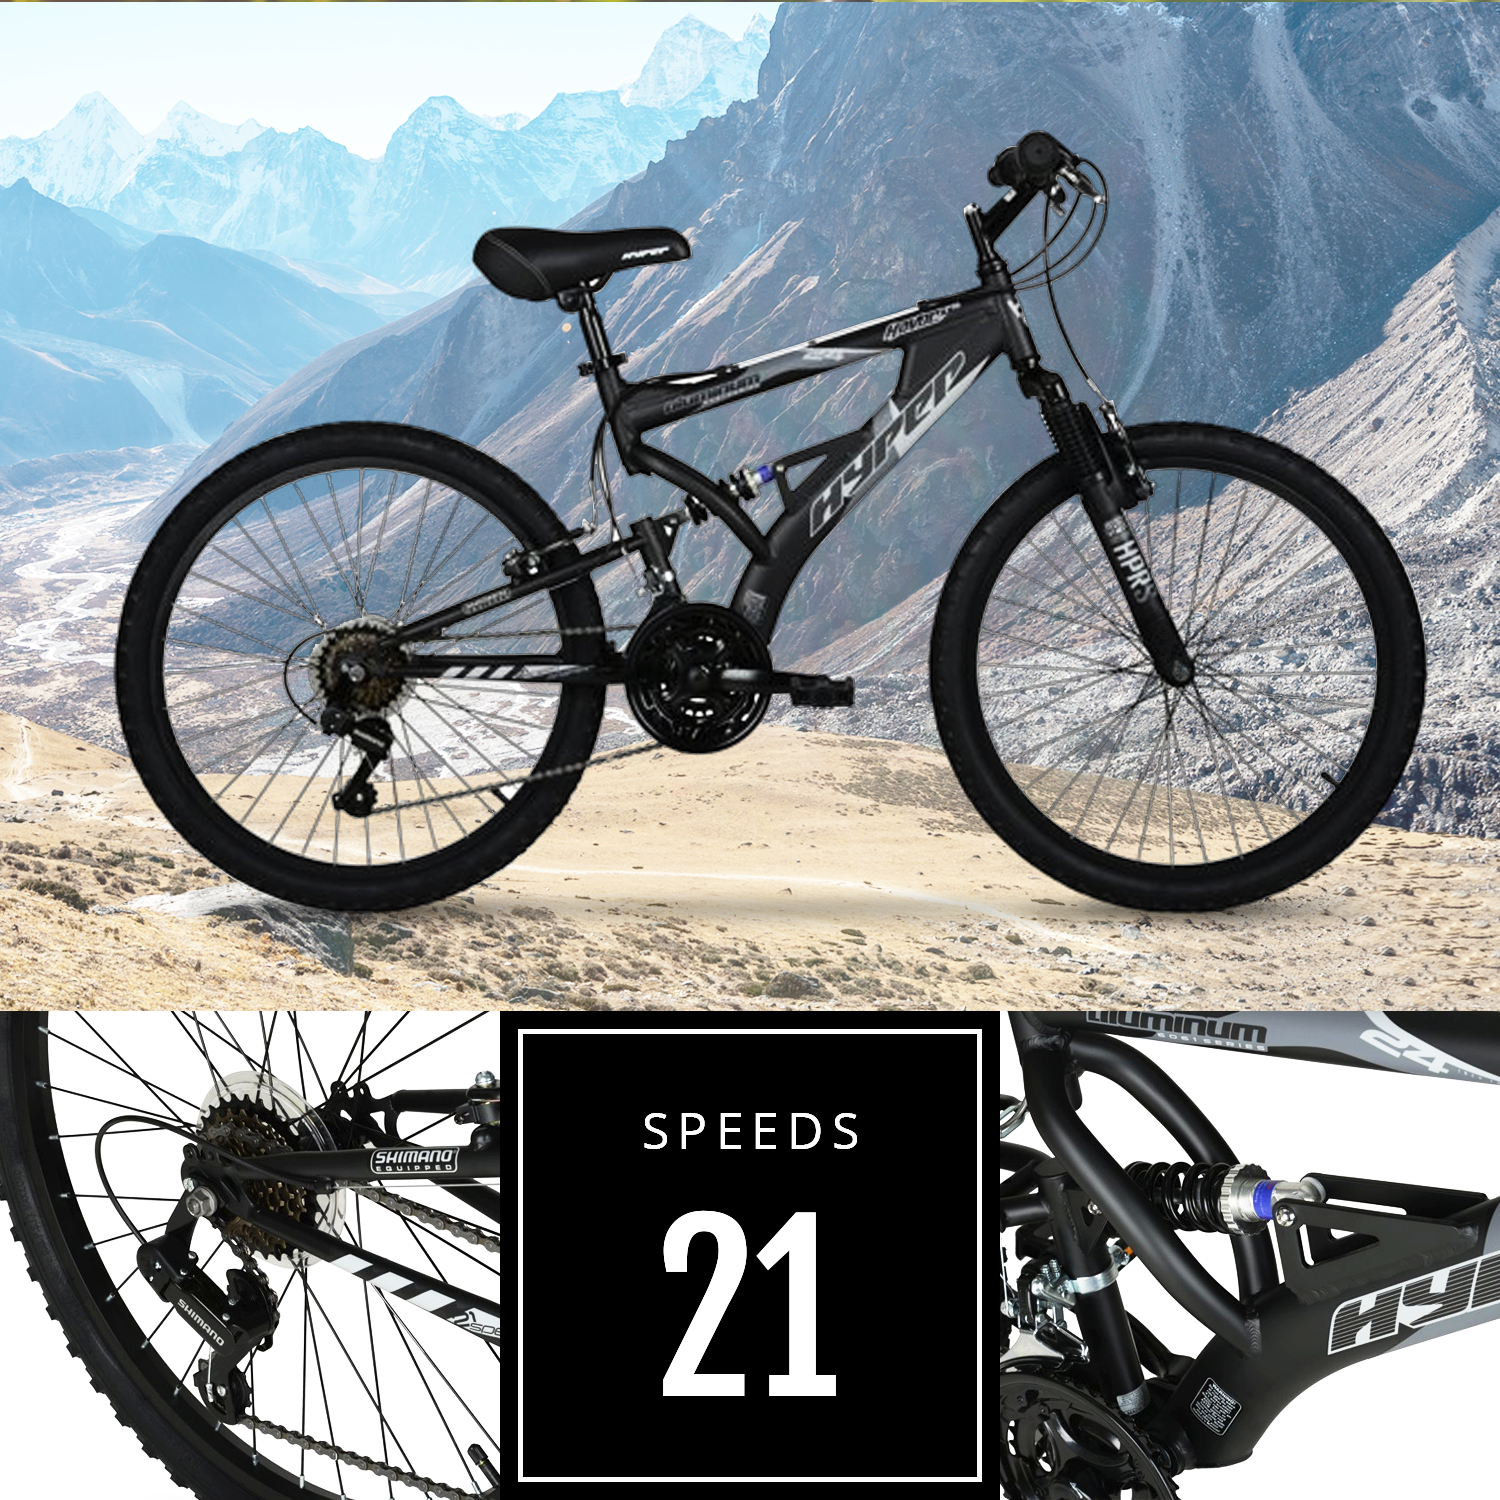 Hyper Bicycles 24" Boy's Havoc Mountain Bike, Black, Recommended Ages group 10 to 14 Years Old - image 4 of 14